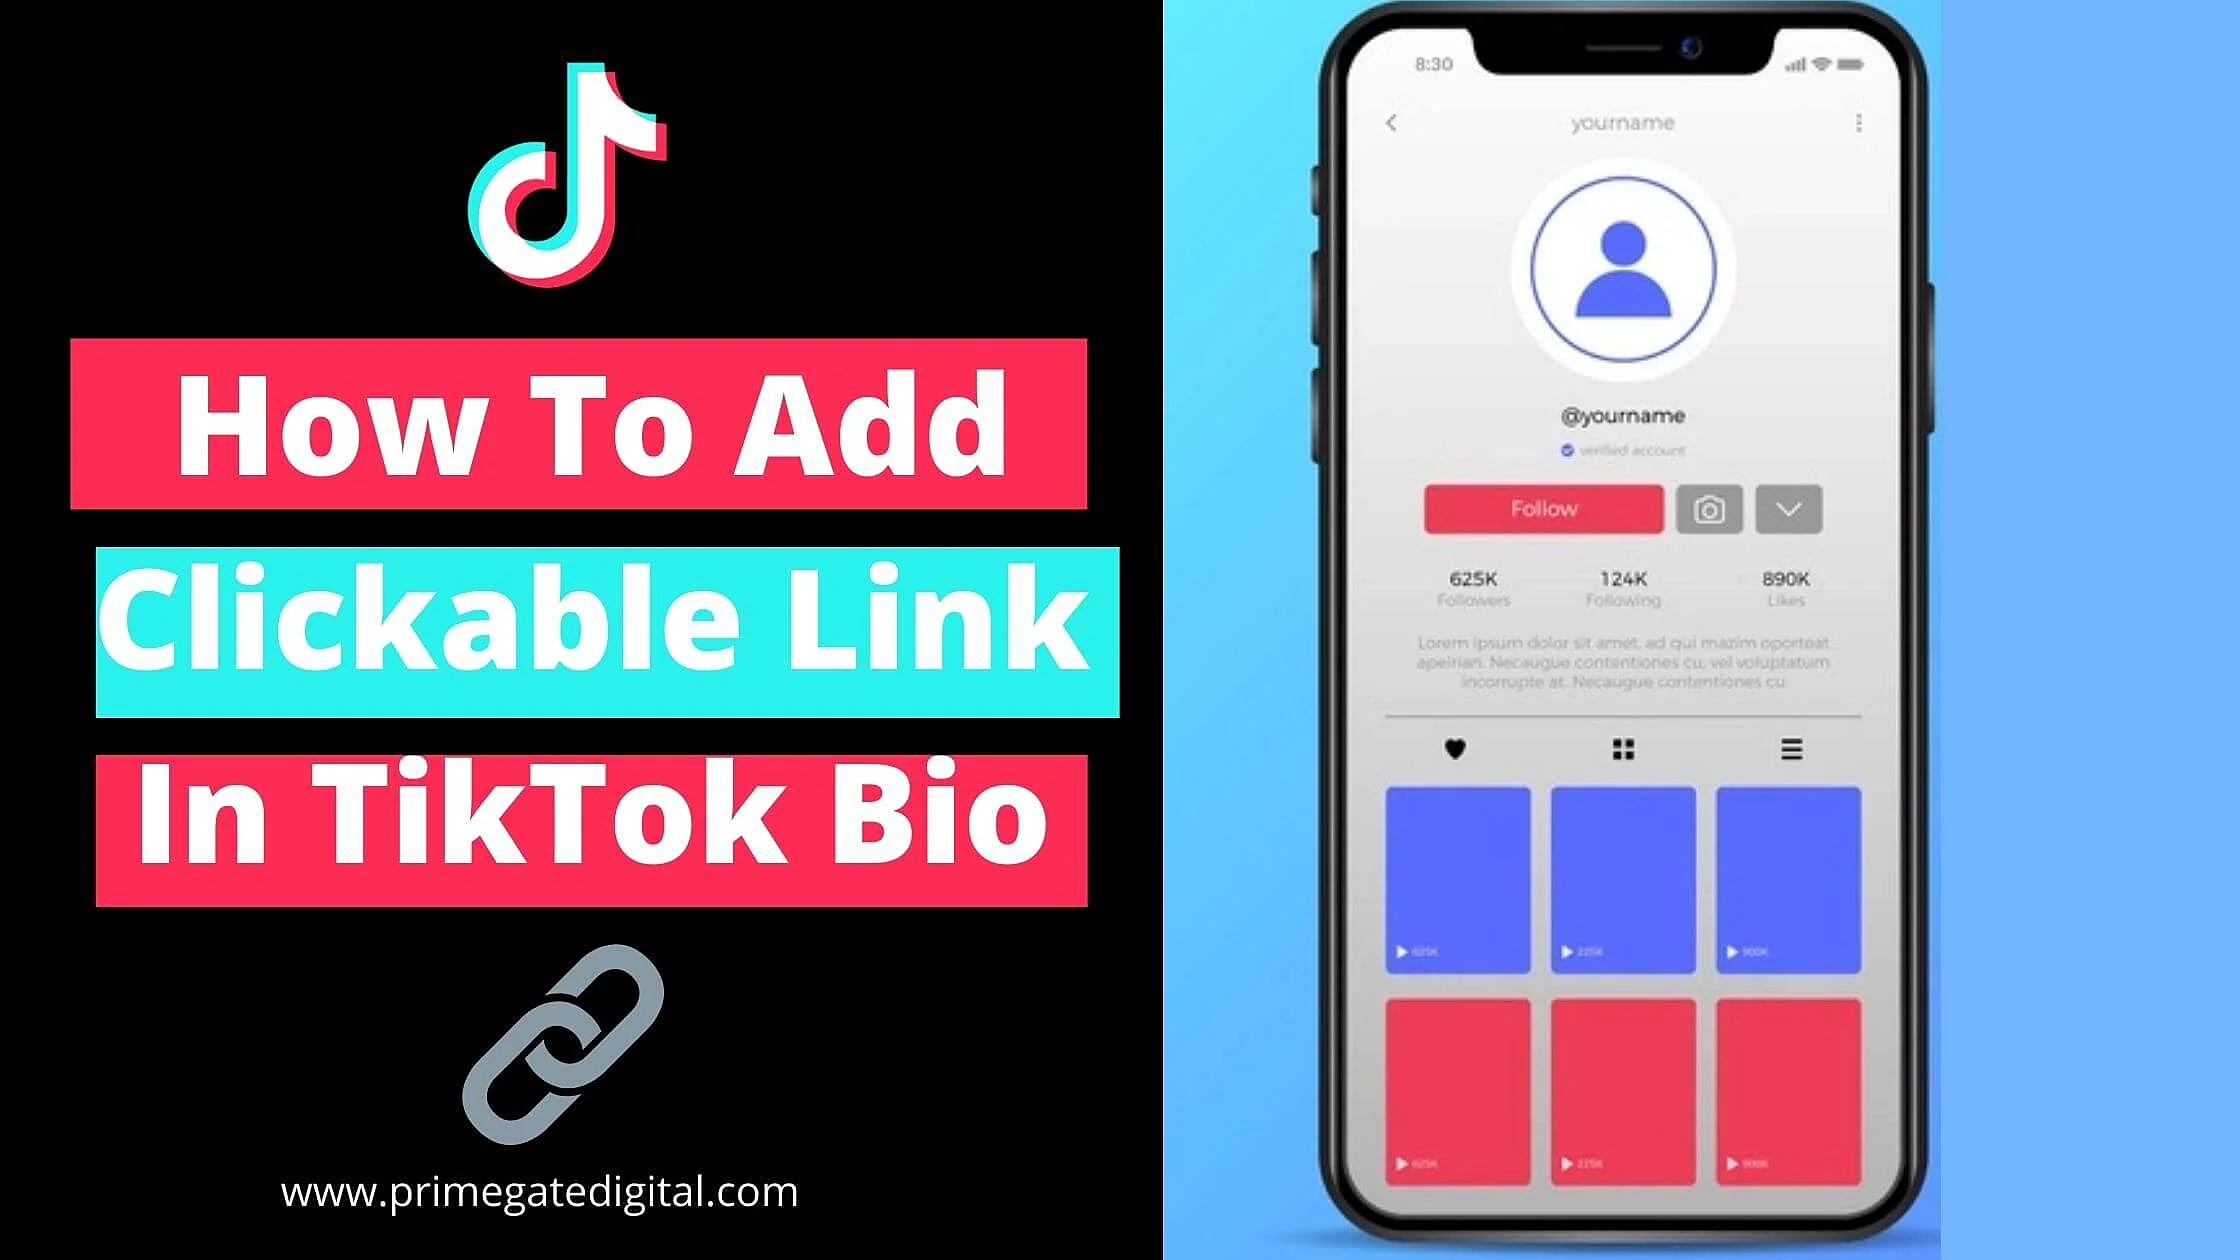 How To Add Clickable Link In TikTok Bio